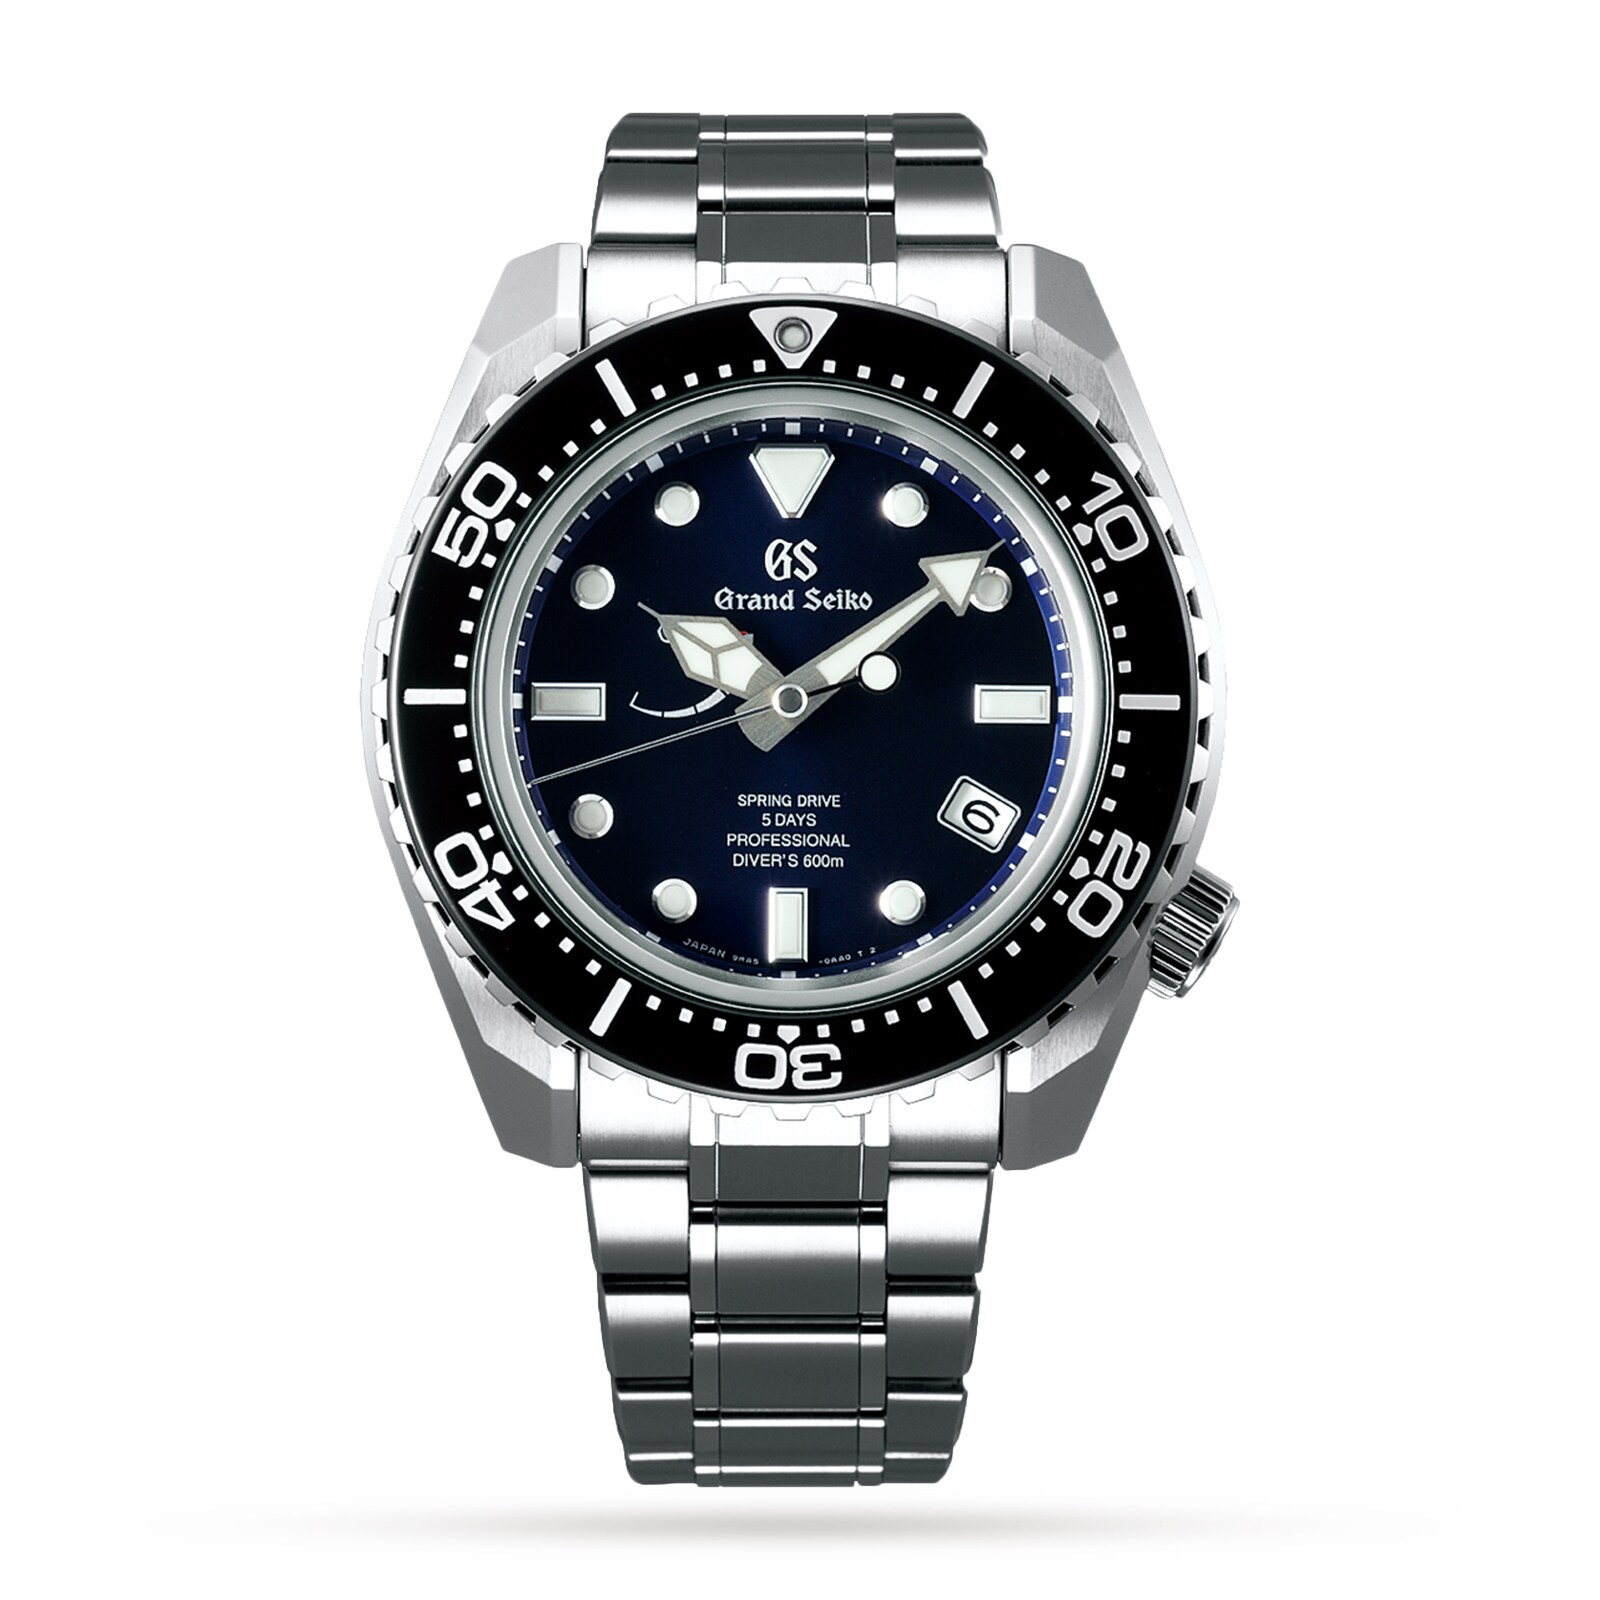 Limited Edition Professional Divers 600M